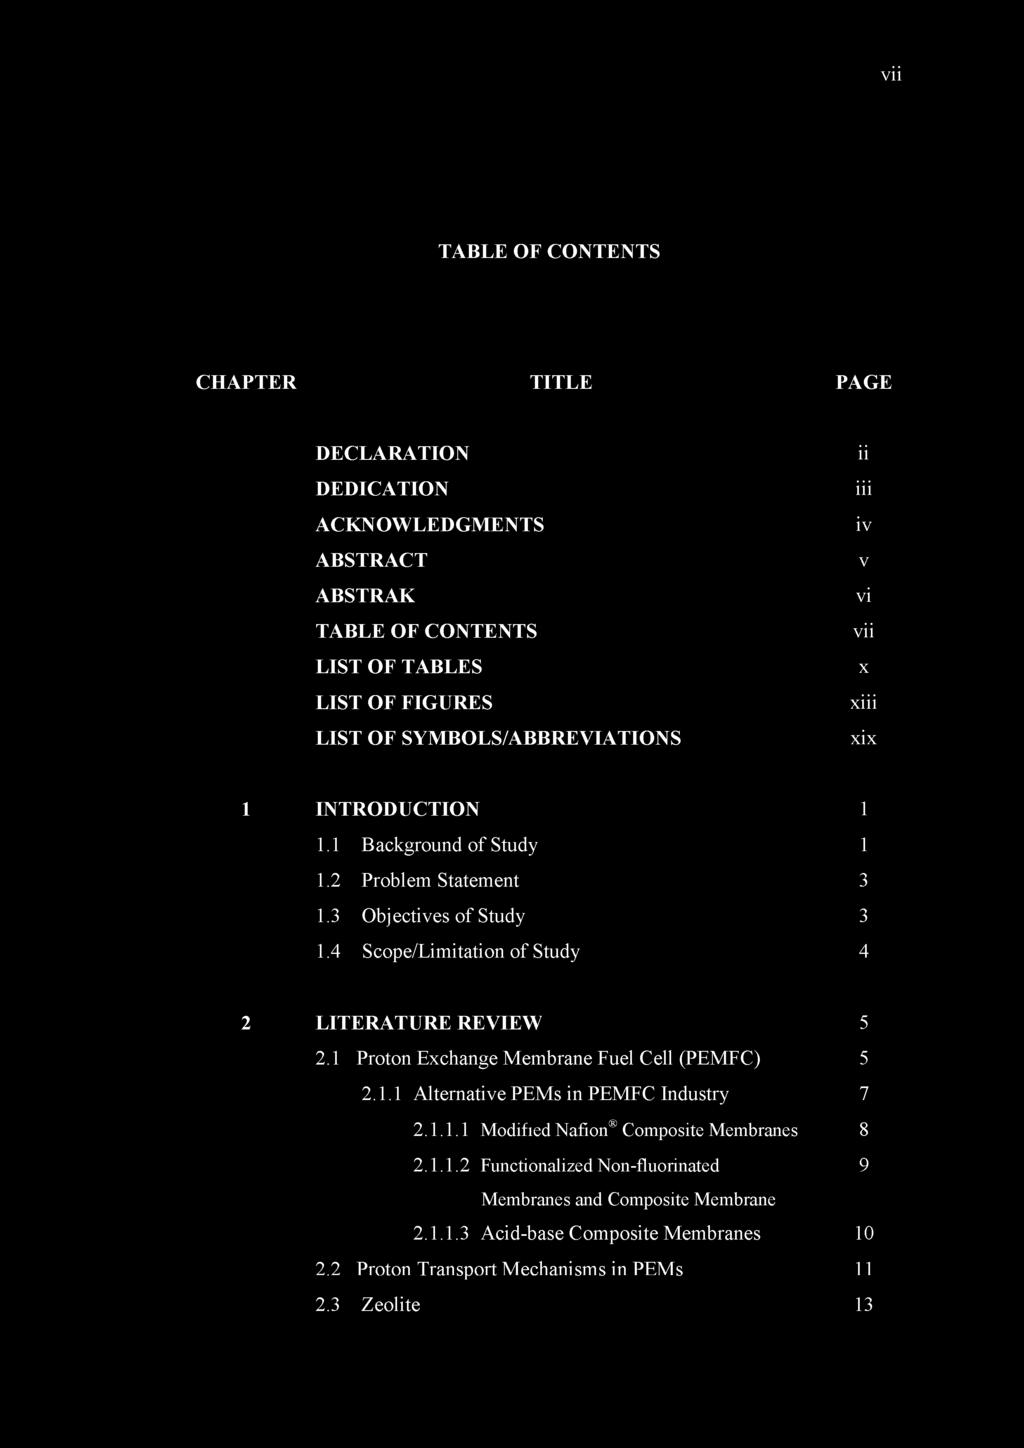 vii TABLE OF CONTENTS CHAPTER TITLE PAGE DECLARATION DEDICATION ACKNOW LEDGM ENTS ABSTRA CT ABSTRAK TABLE O F CONTENTS LIST OF TABLES LIST OF FIGURES LIST O F SYM BOLS/ABBREVIATIONS ii iii iv v vi